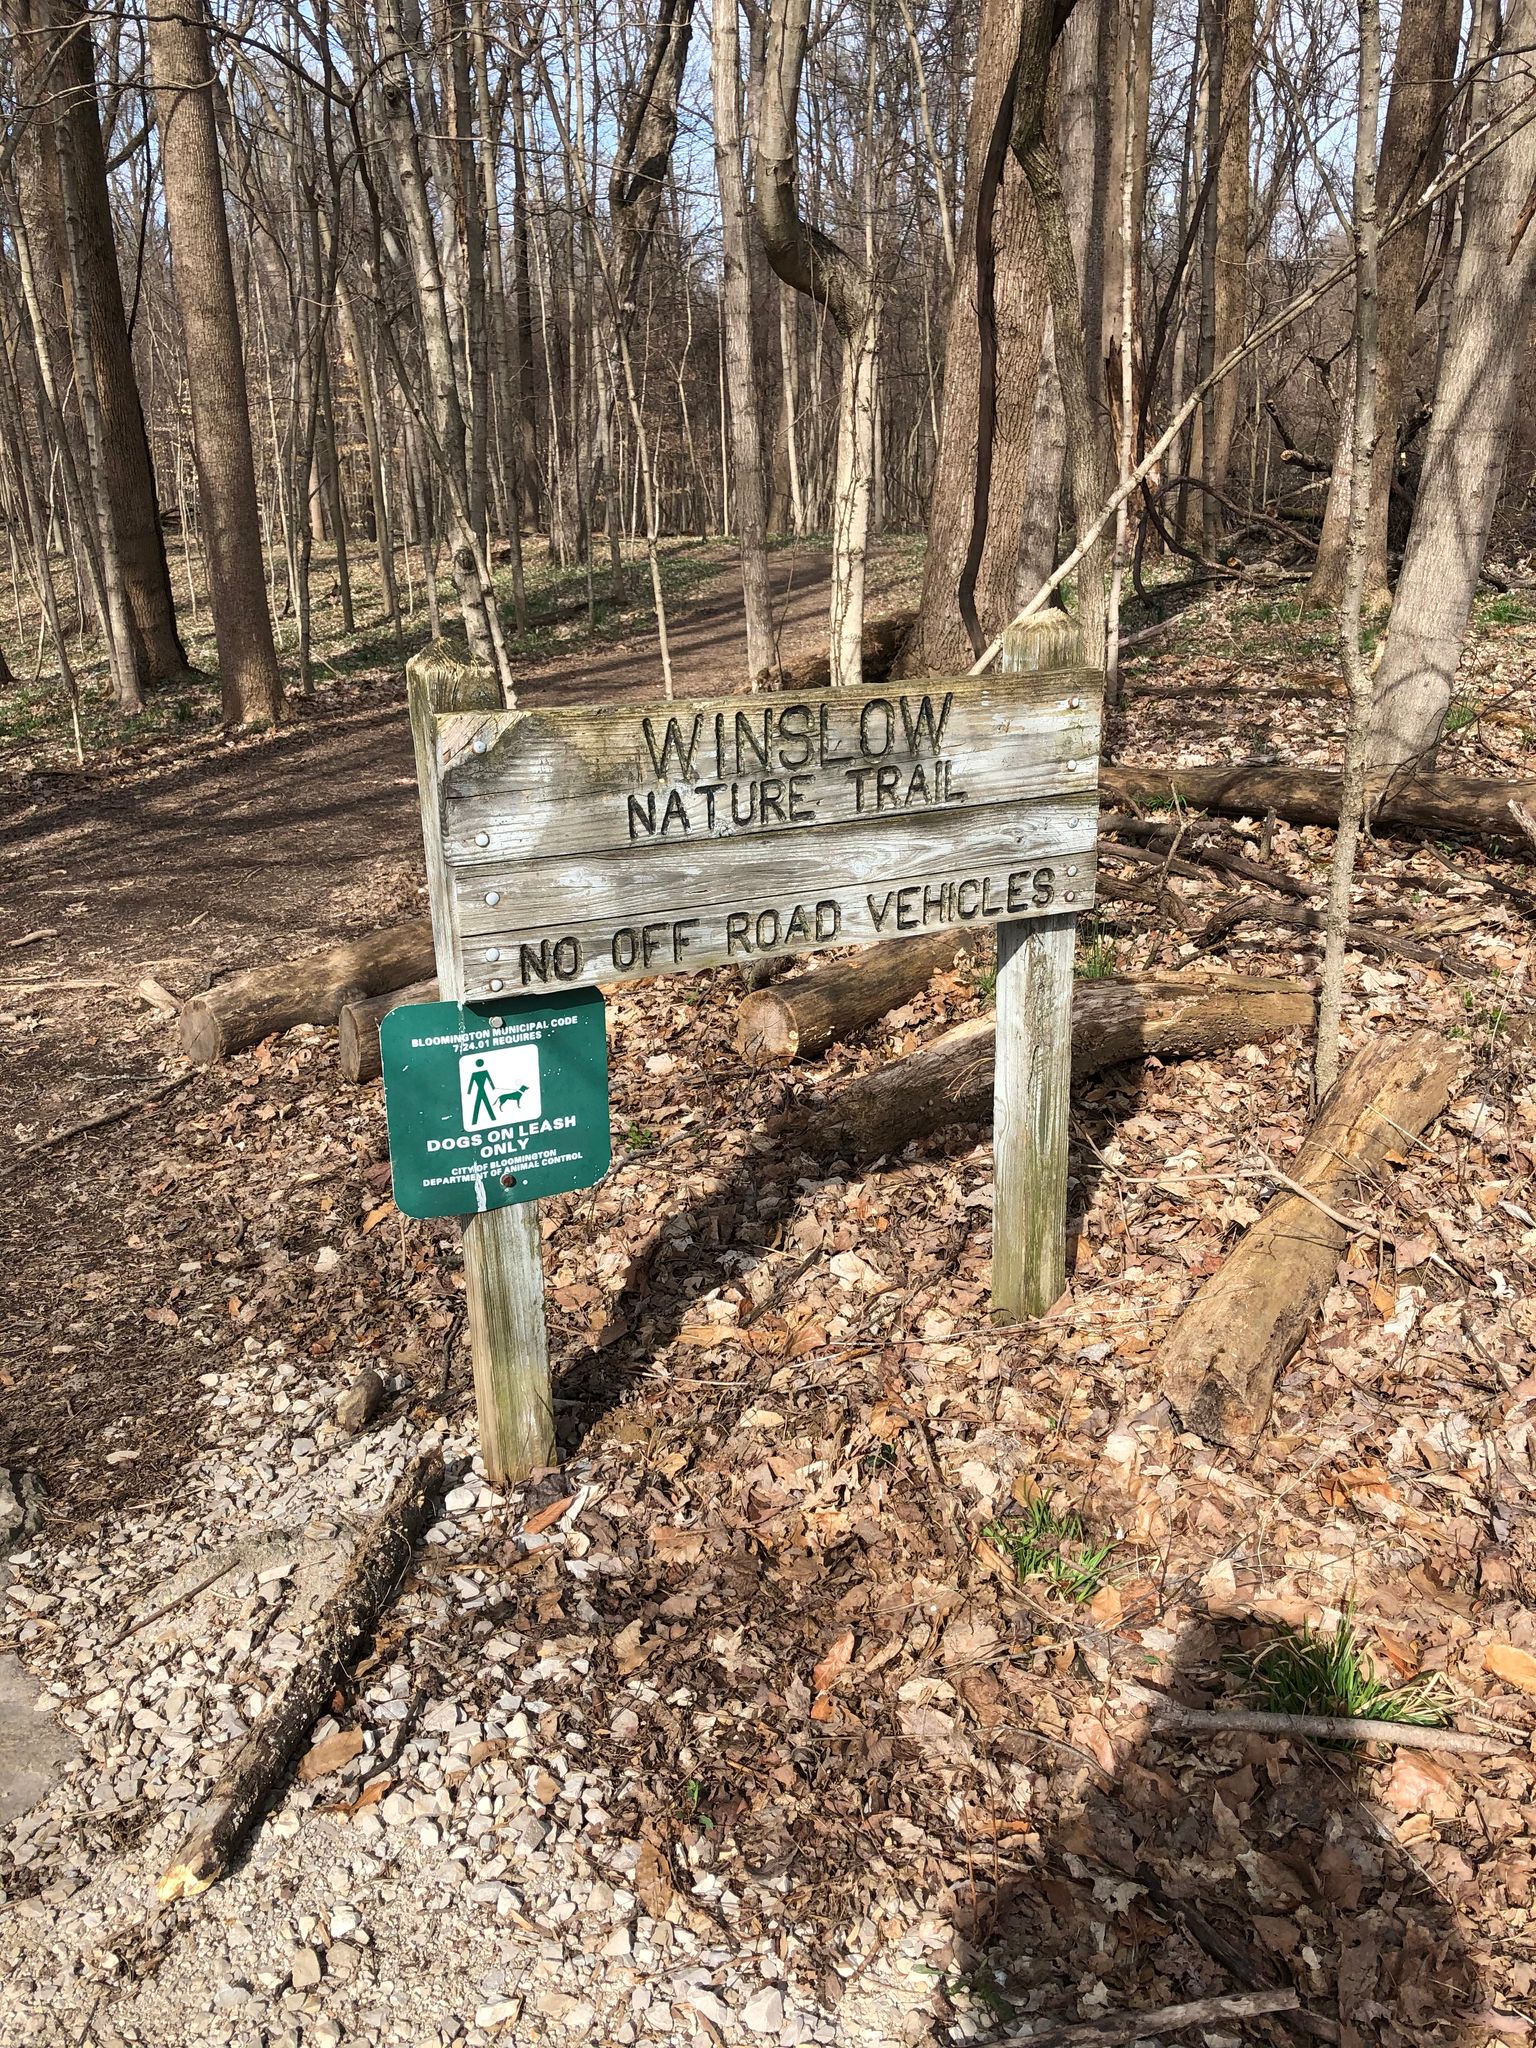 Winslow Woods Nature Trail